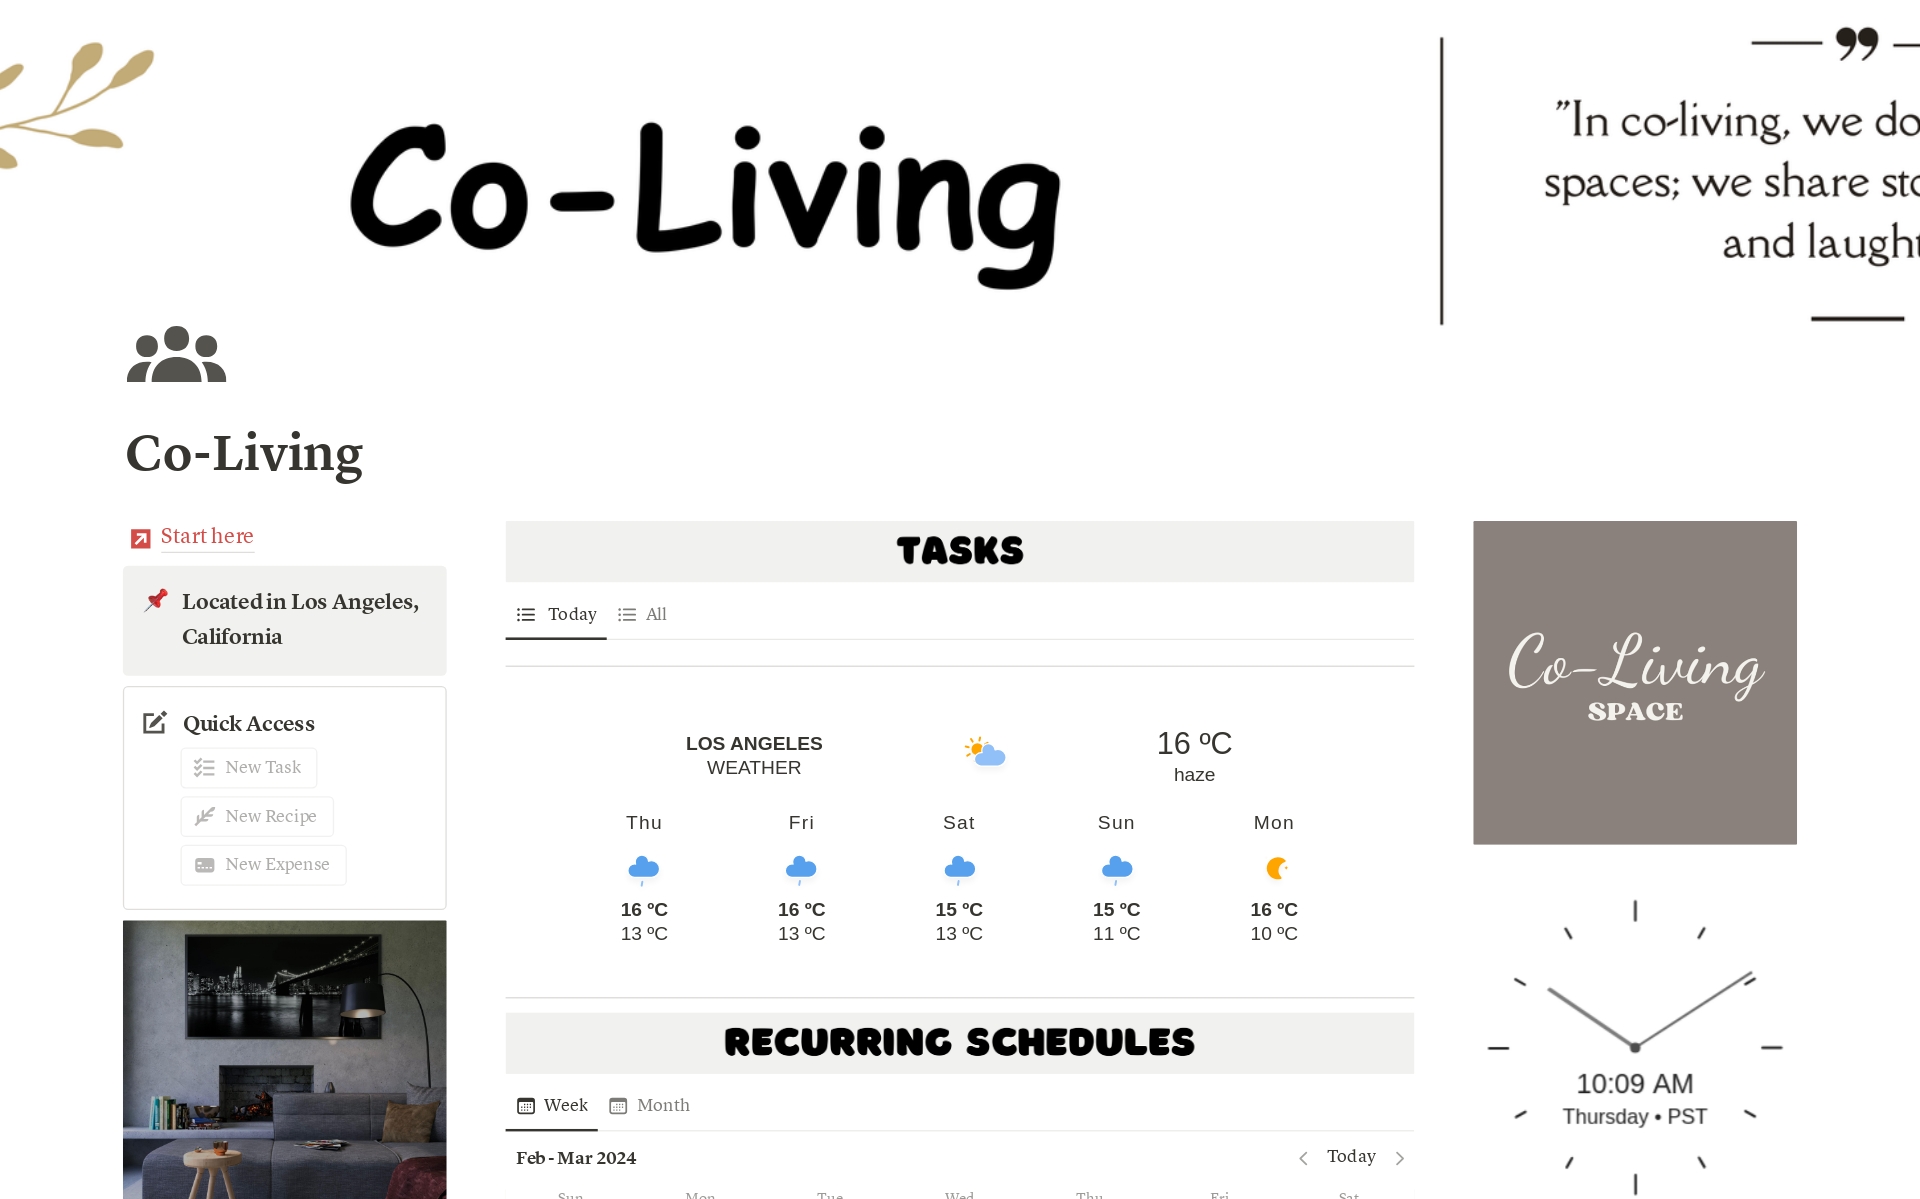 It's an all-in-one Notion template to organize, connect, and enhance your co-living experience with features like event planning, chore management, manage finances, etc.